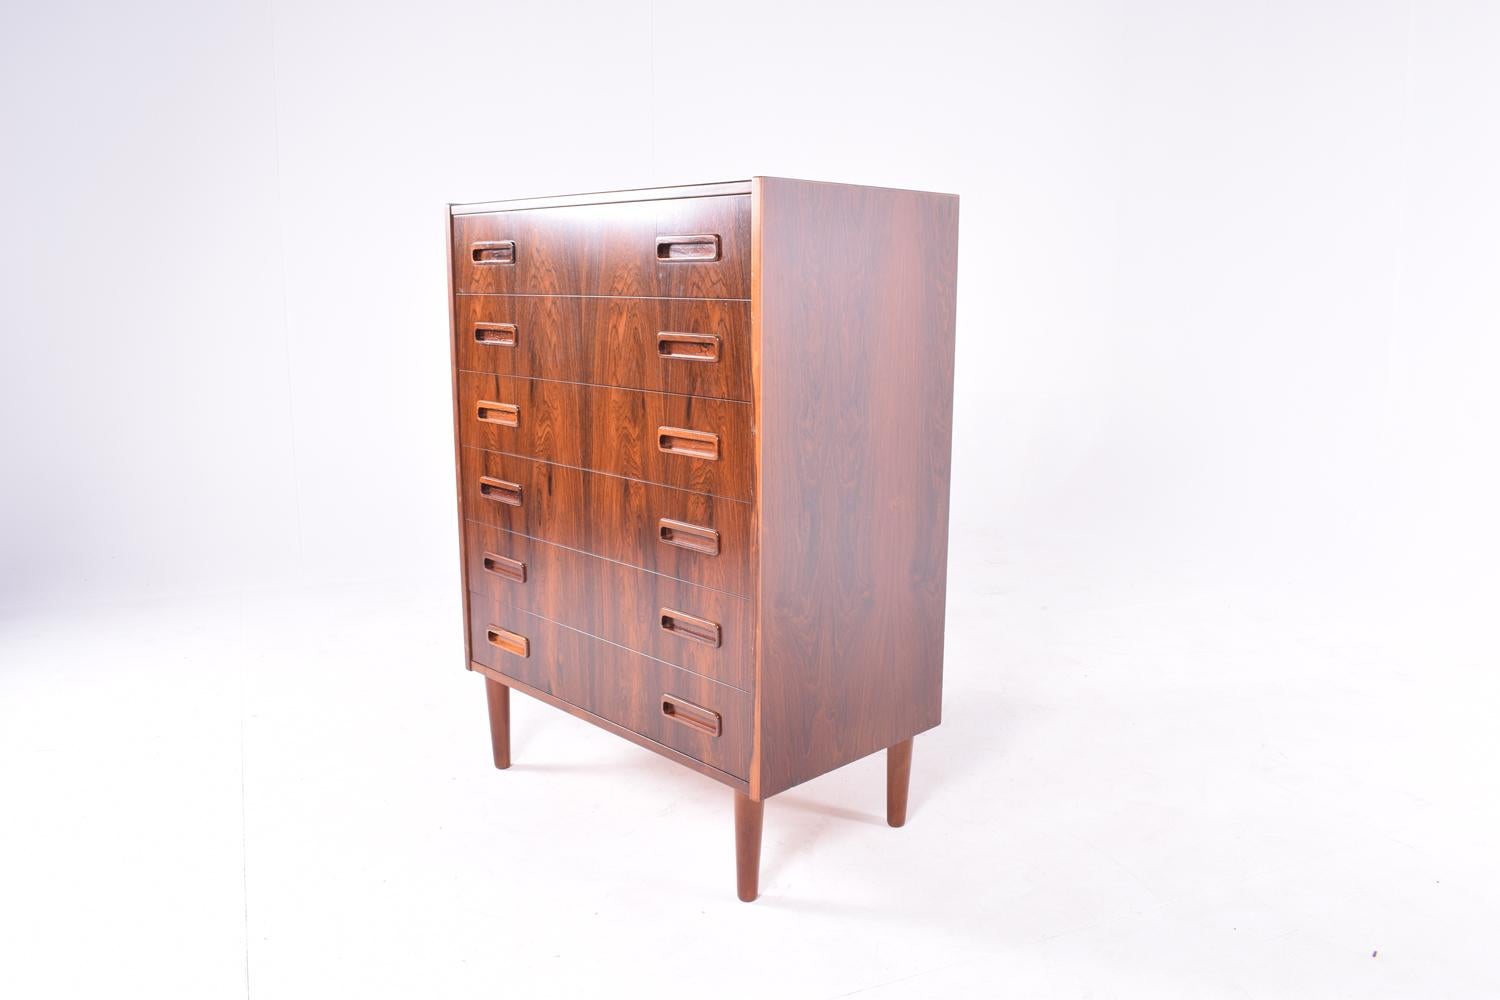 Midcentury rosewood chest of drawers with six front drawers and round tapered legs.
Exceptional veneer and amazing craftsmanship on the handles. A piece of excellence to add to your bedroom decoration.